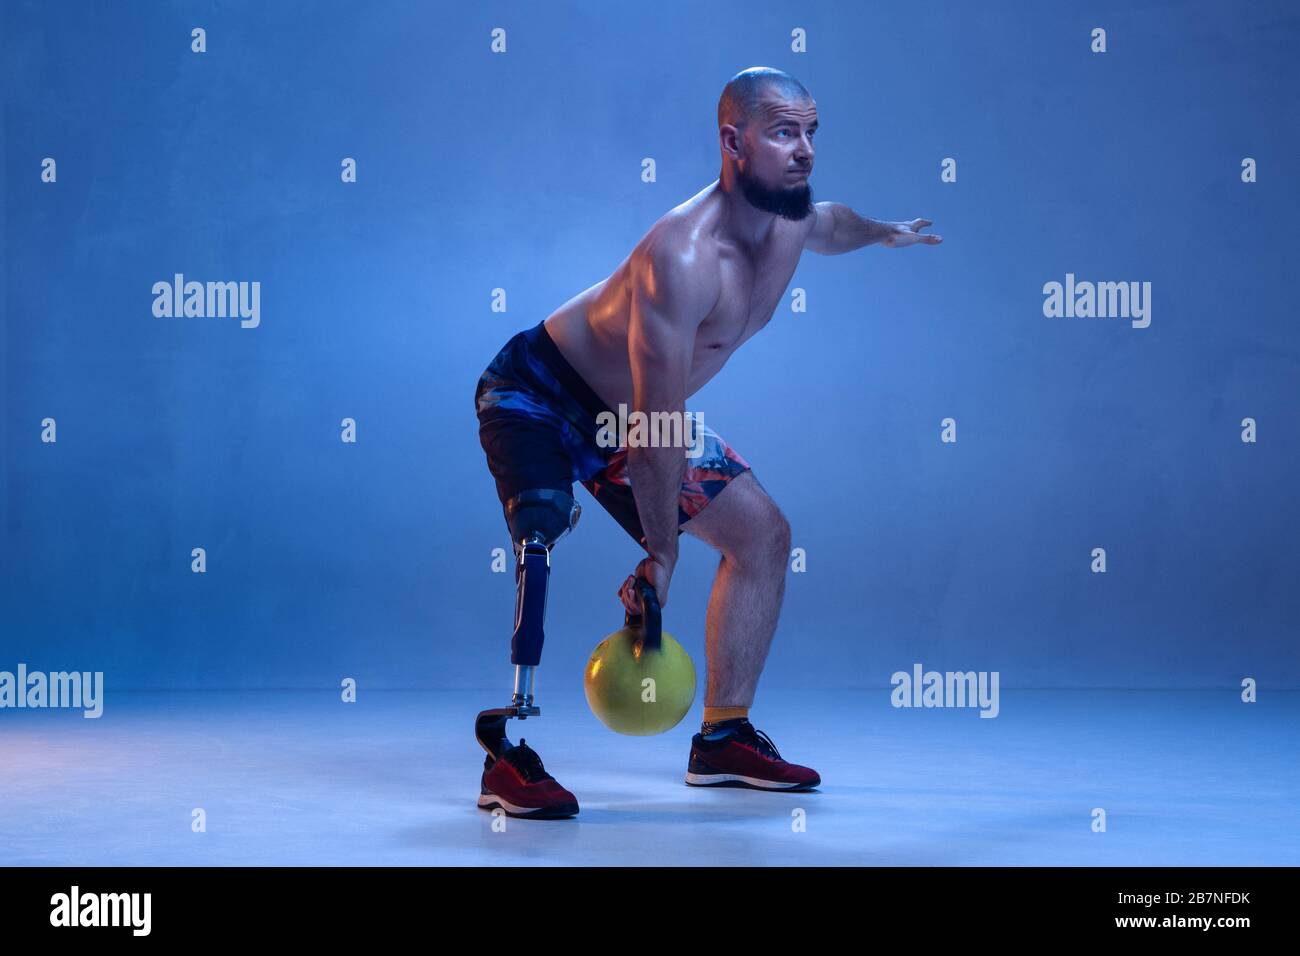 Athlete with disabilities or amputee isolated on blue studio background. Professional male sportsman with leg prosthesis training with weights in neon. Disabled sport and overcoming, wellness concept. Stock Photo